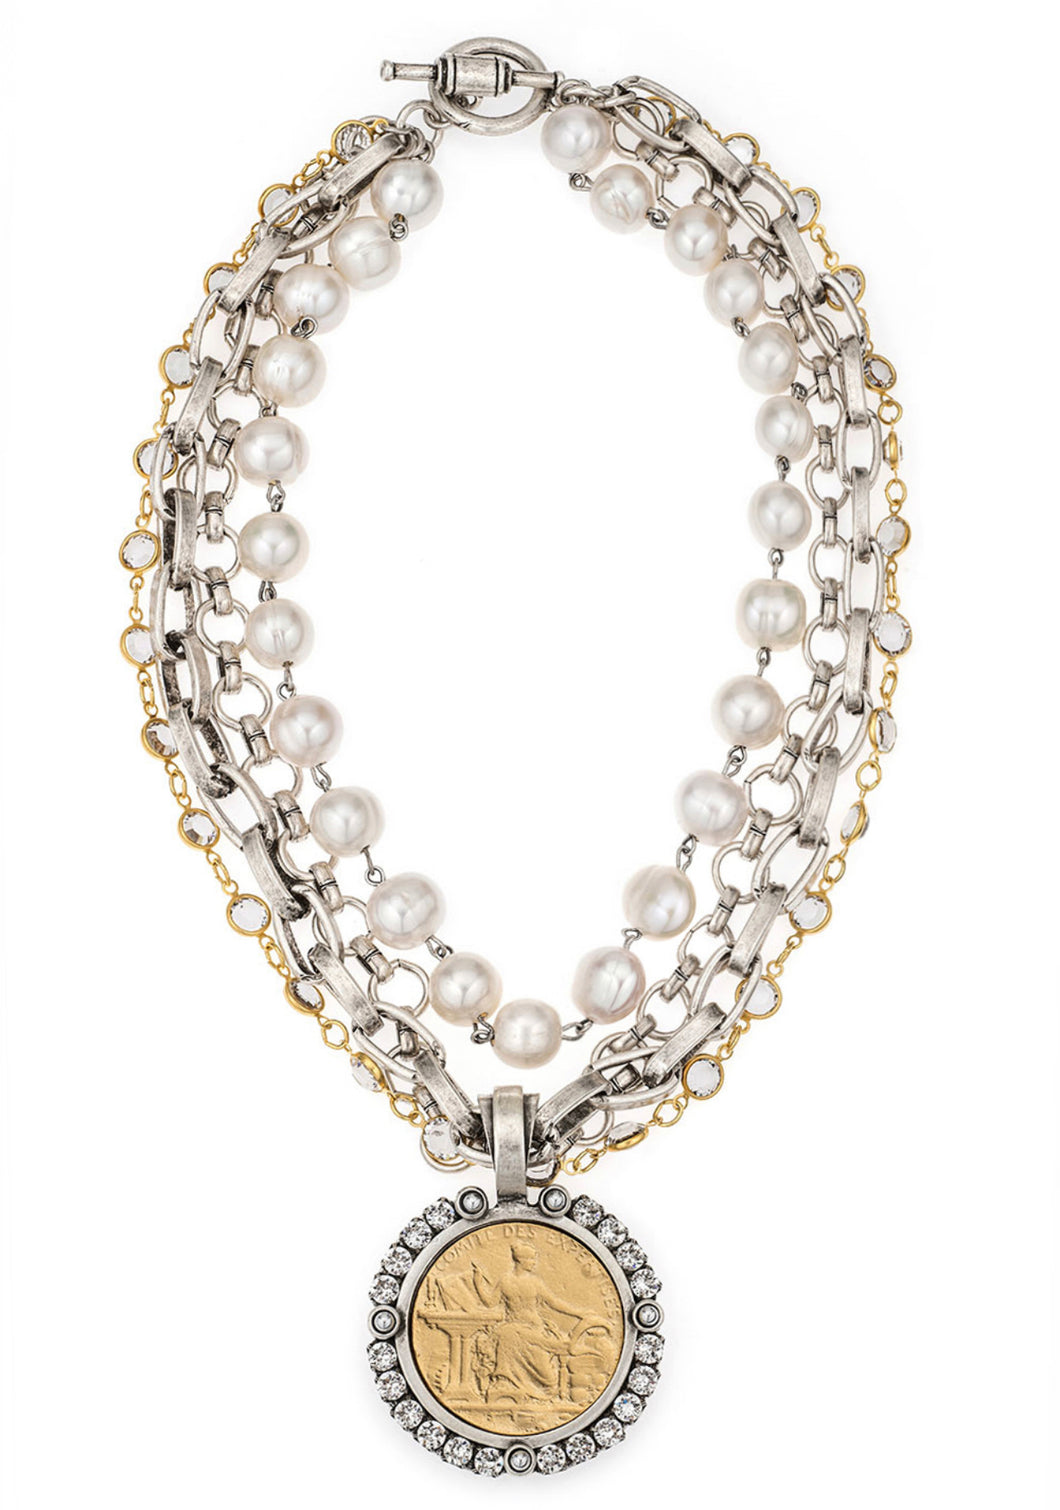 French Kande Four Strand Austrian Crystal, Pearl, and Chains with Comite Medallion